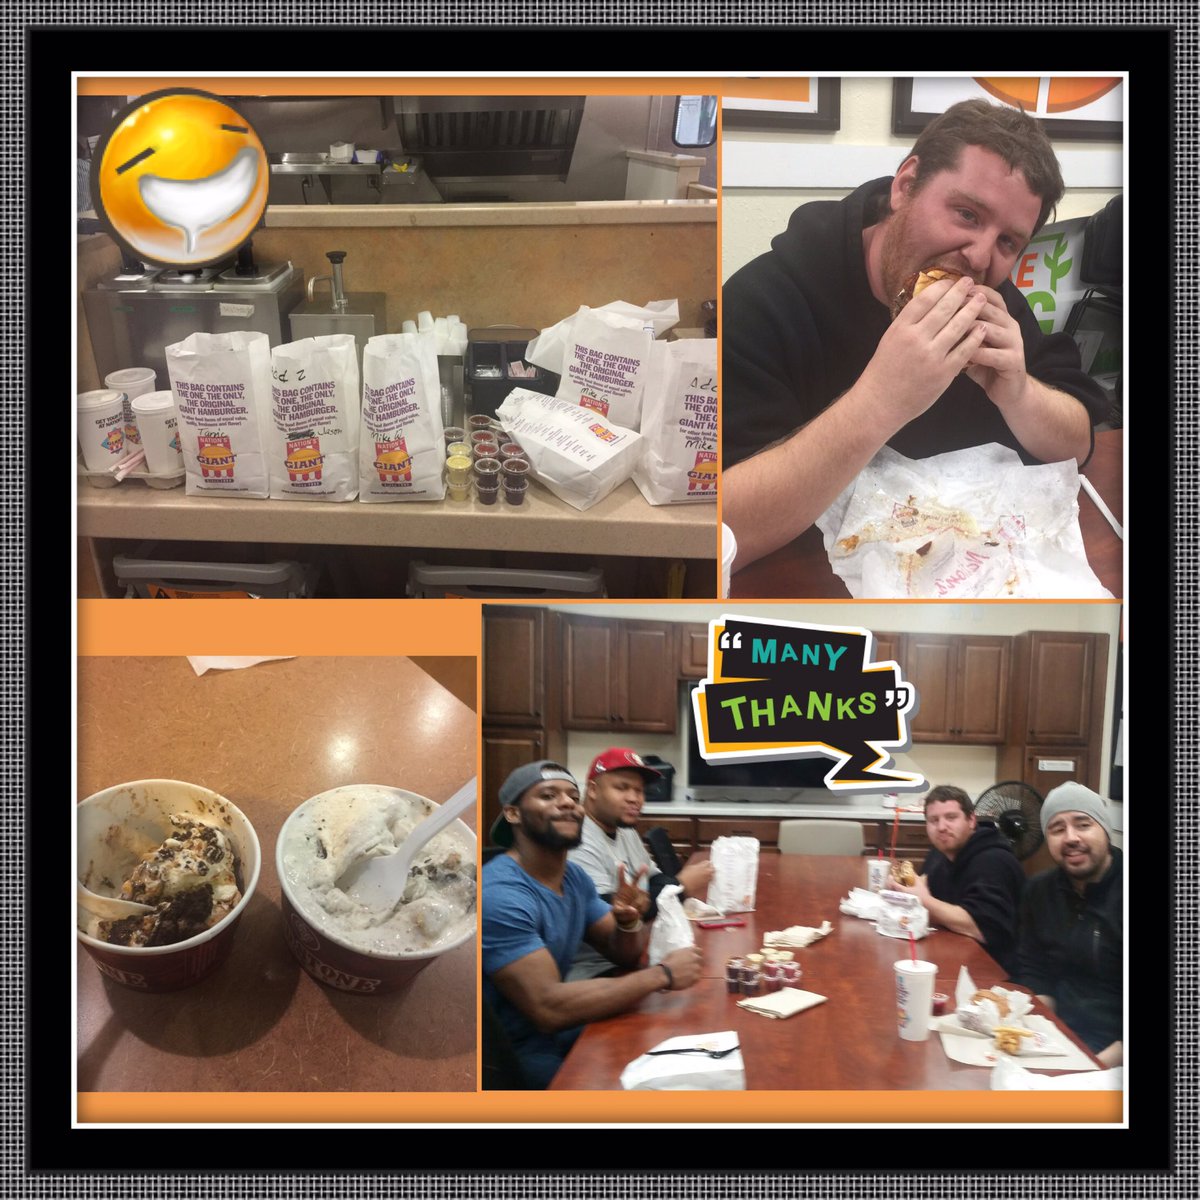 Fresh Nations and Cold Stone for the unload team! Thank you, your hard work does not go unnoticed 🍔🍟🍨#D49 #634proud @joshfelkerTHD